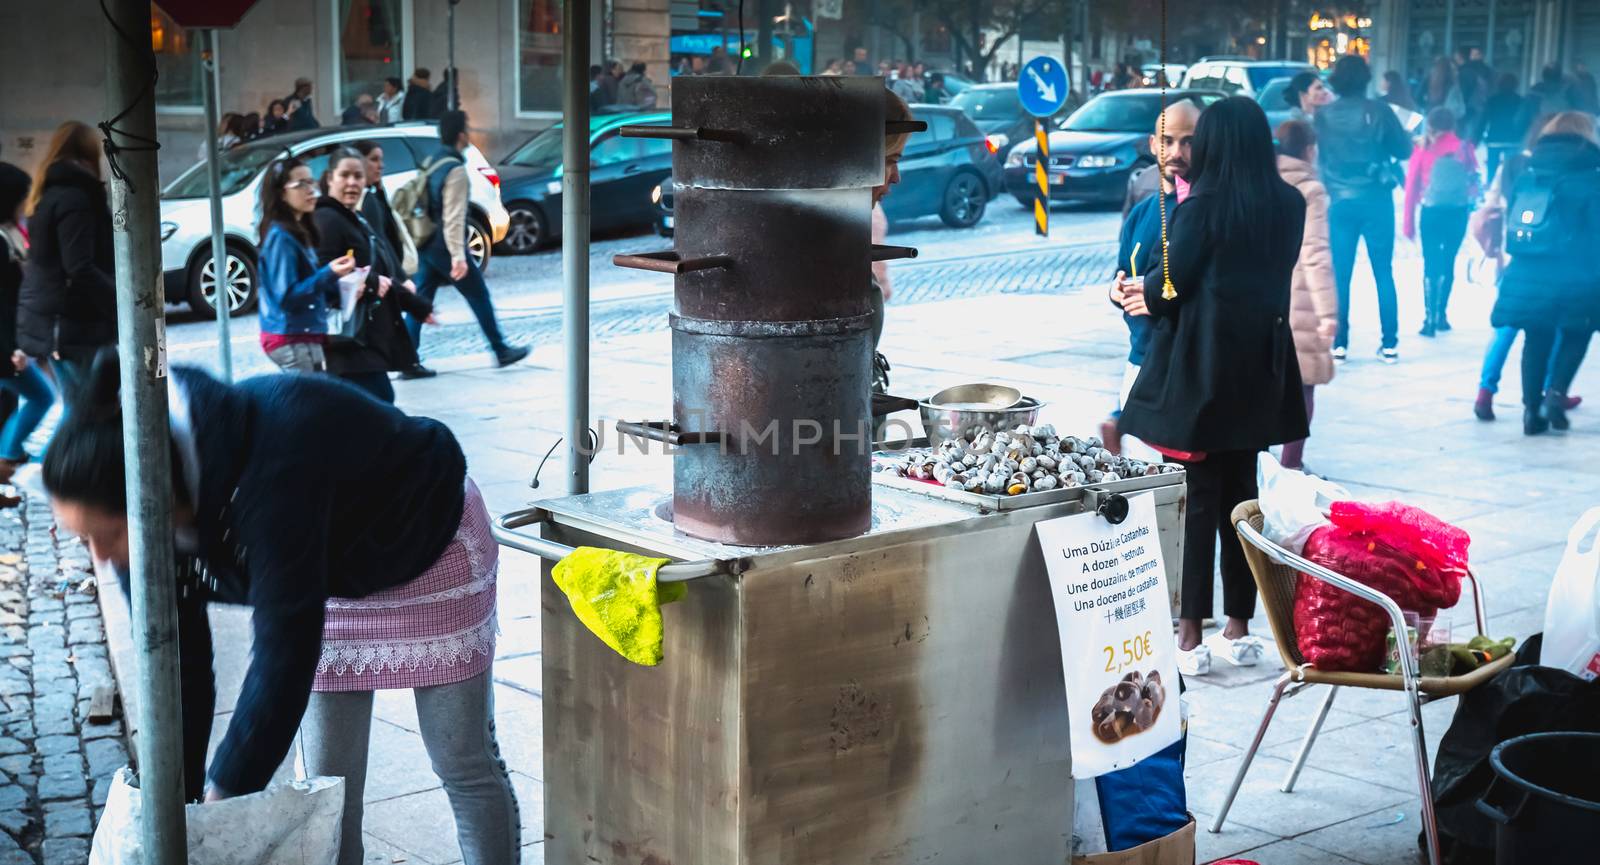 Street vendors of braised chestnuts in front of Sao Bento statio by AtlanticEUROSTOXX